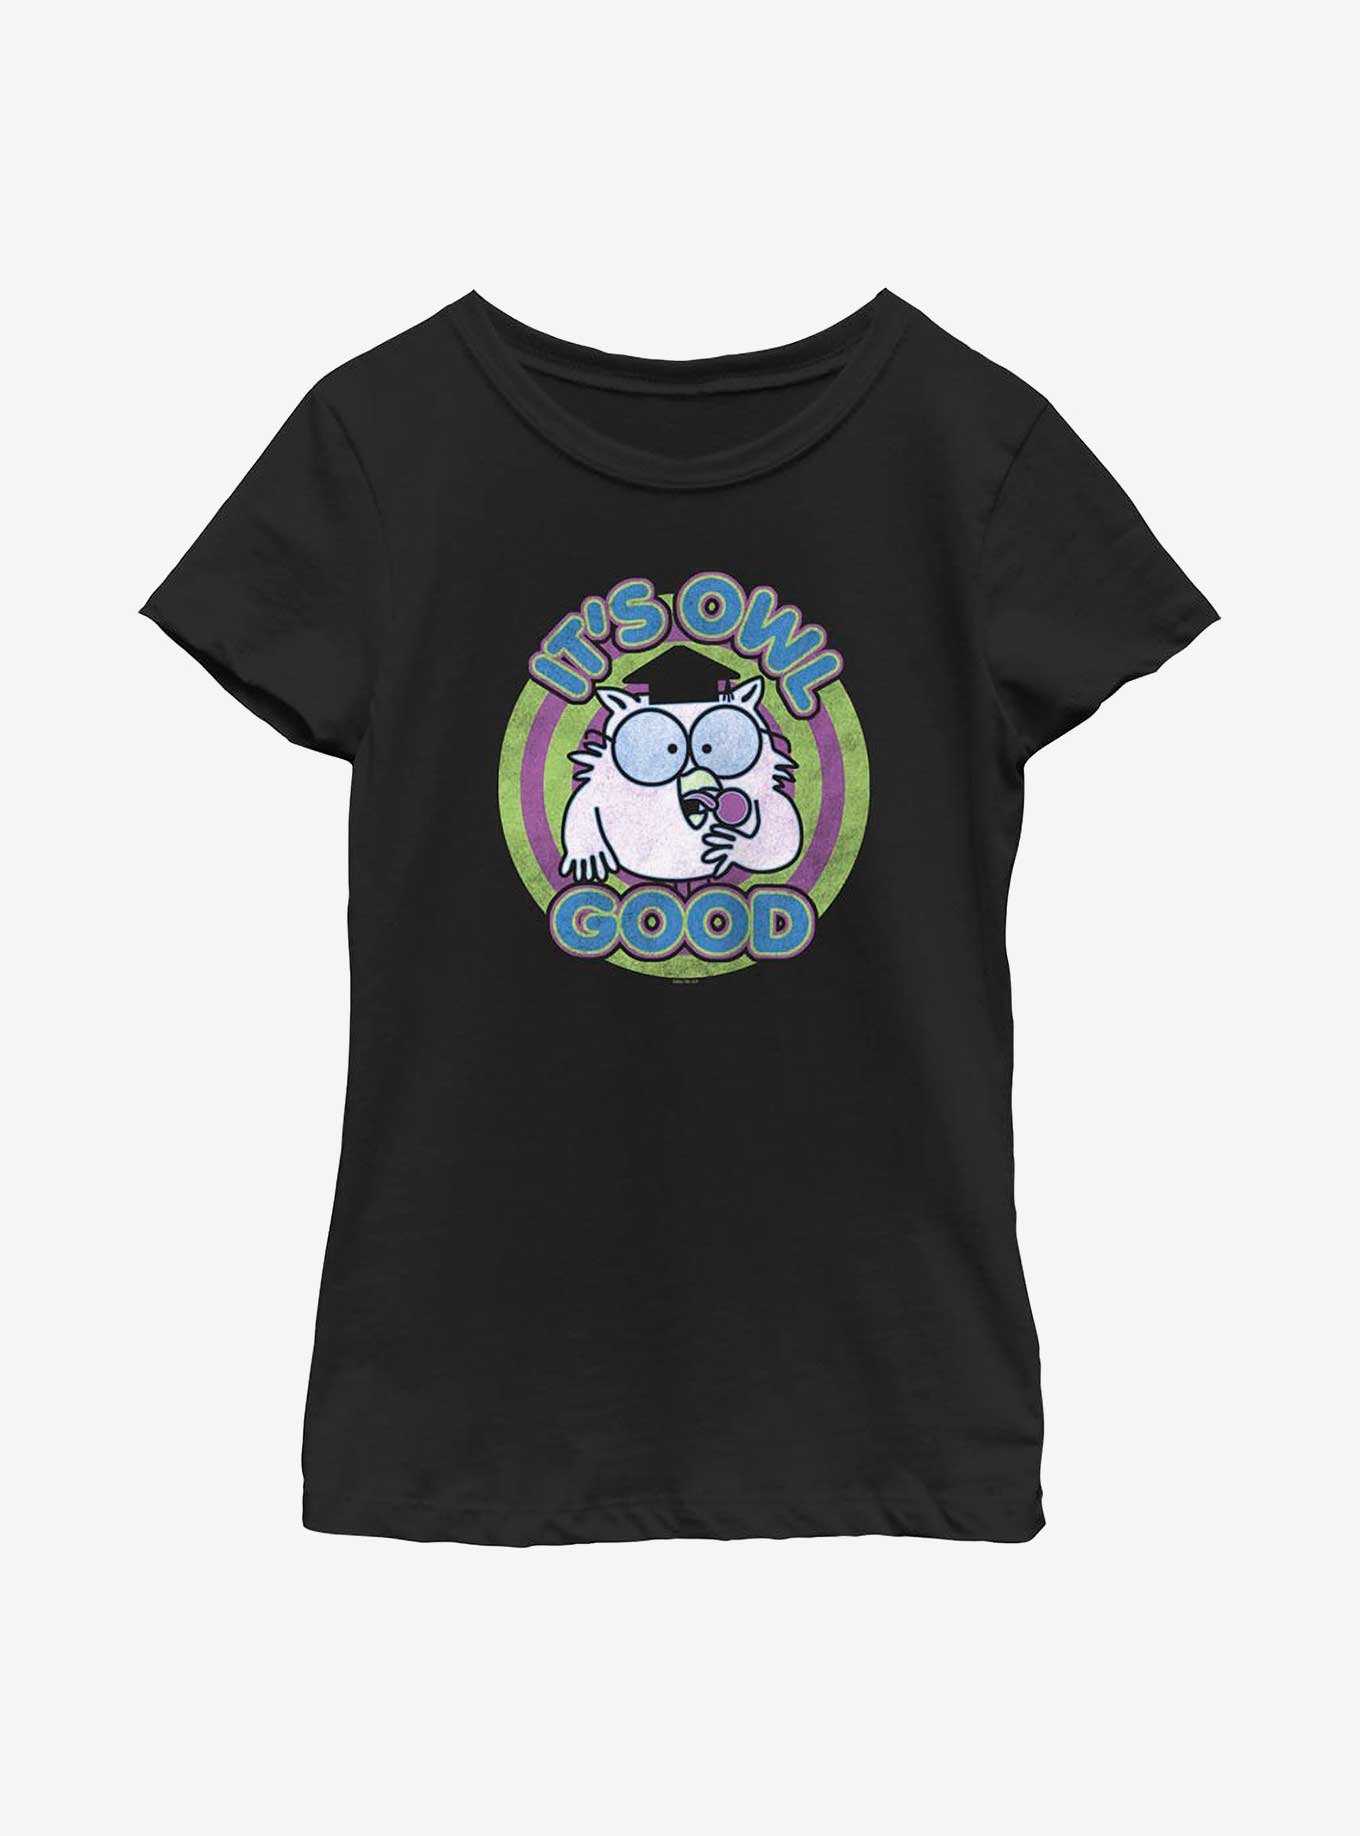 Tootsie Roll It's Owl Good Youth Girls T-Shirt, , hi-res